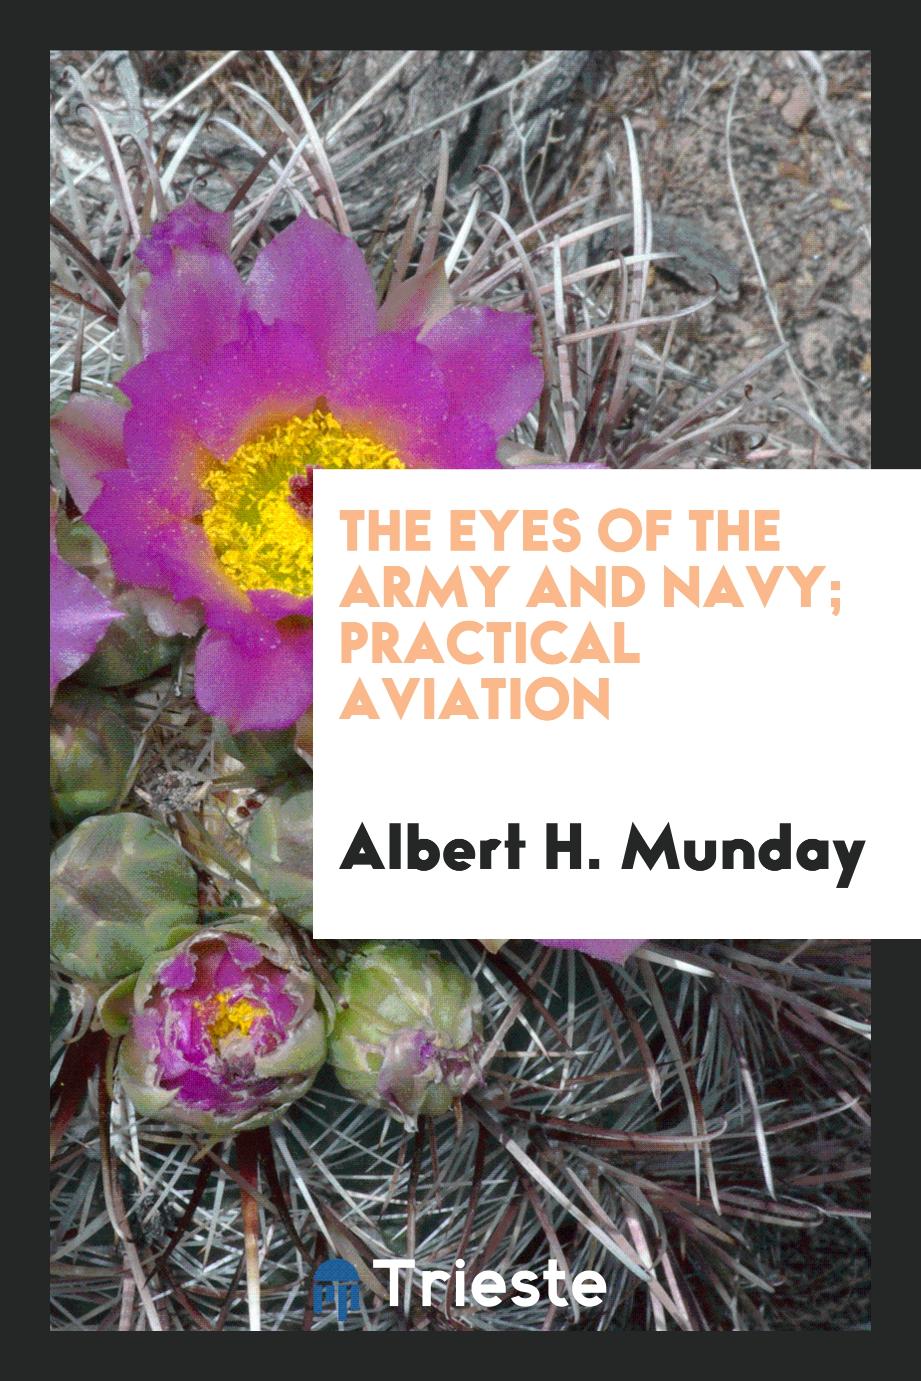 The eyes of the army and navy; Practical Aviation